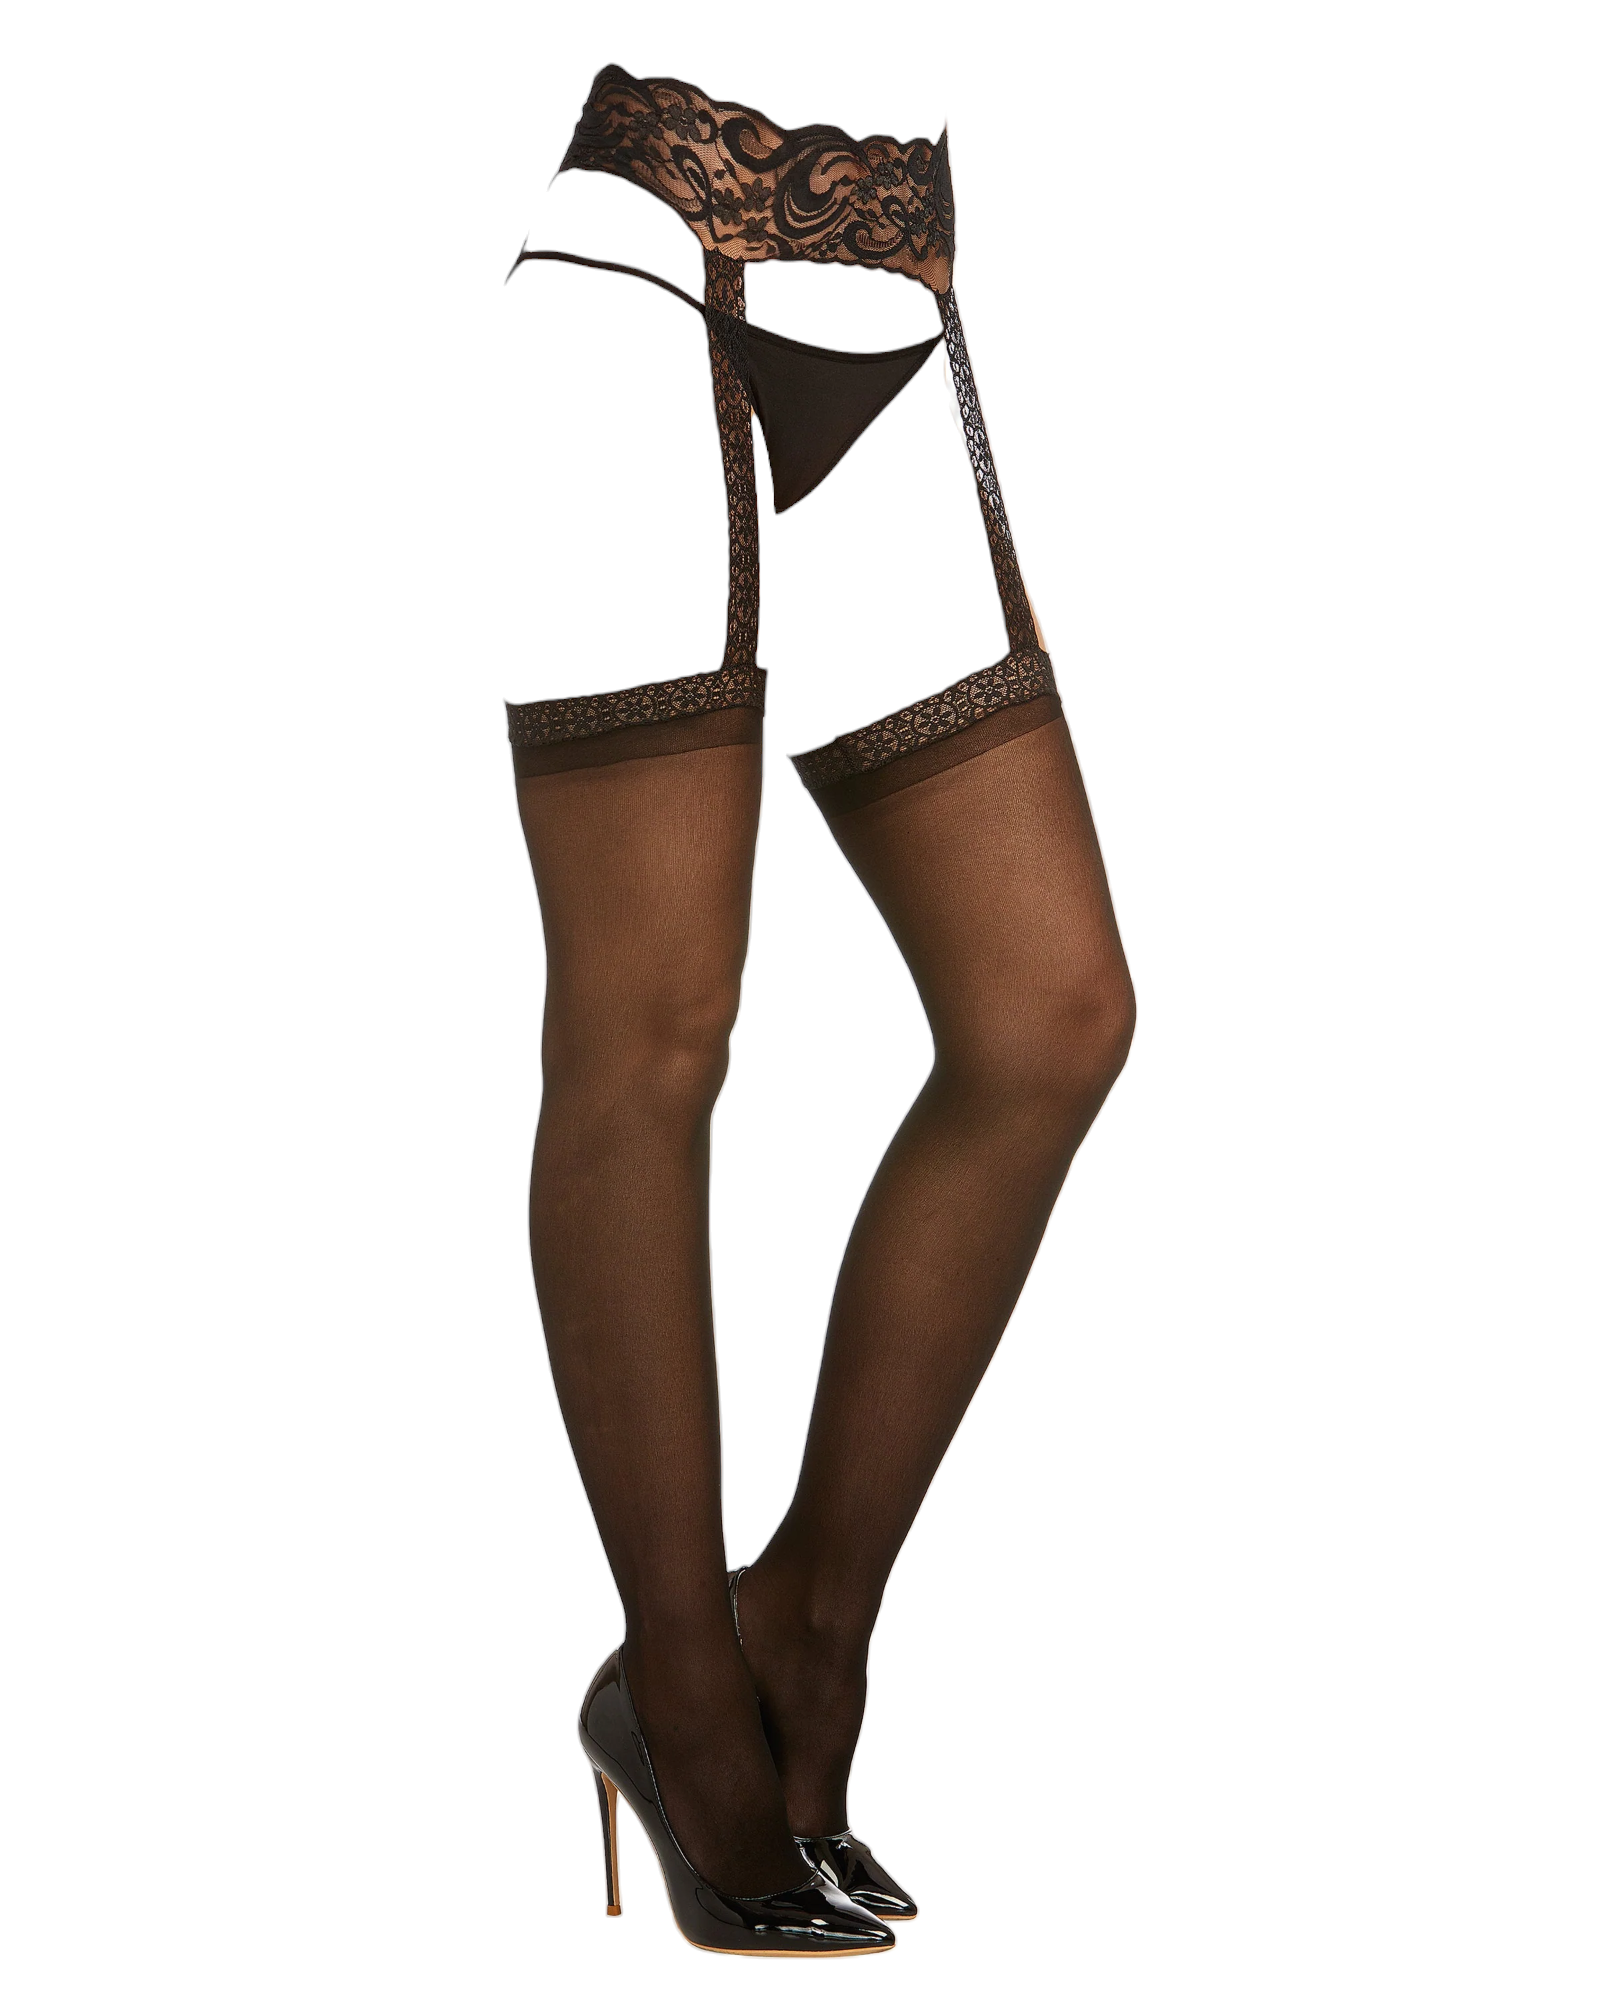 Dreamgirl Stretch Lace Suspender Garter Belt Pantyhose with Sheer Thigh-High Stockings Black